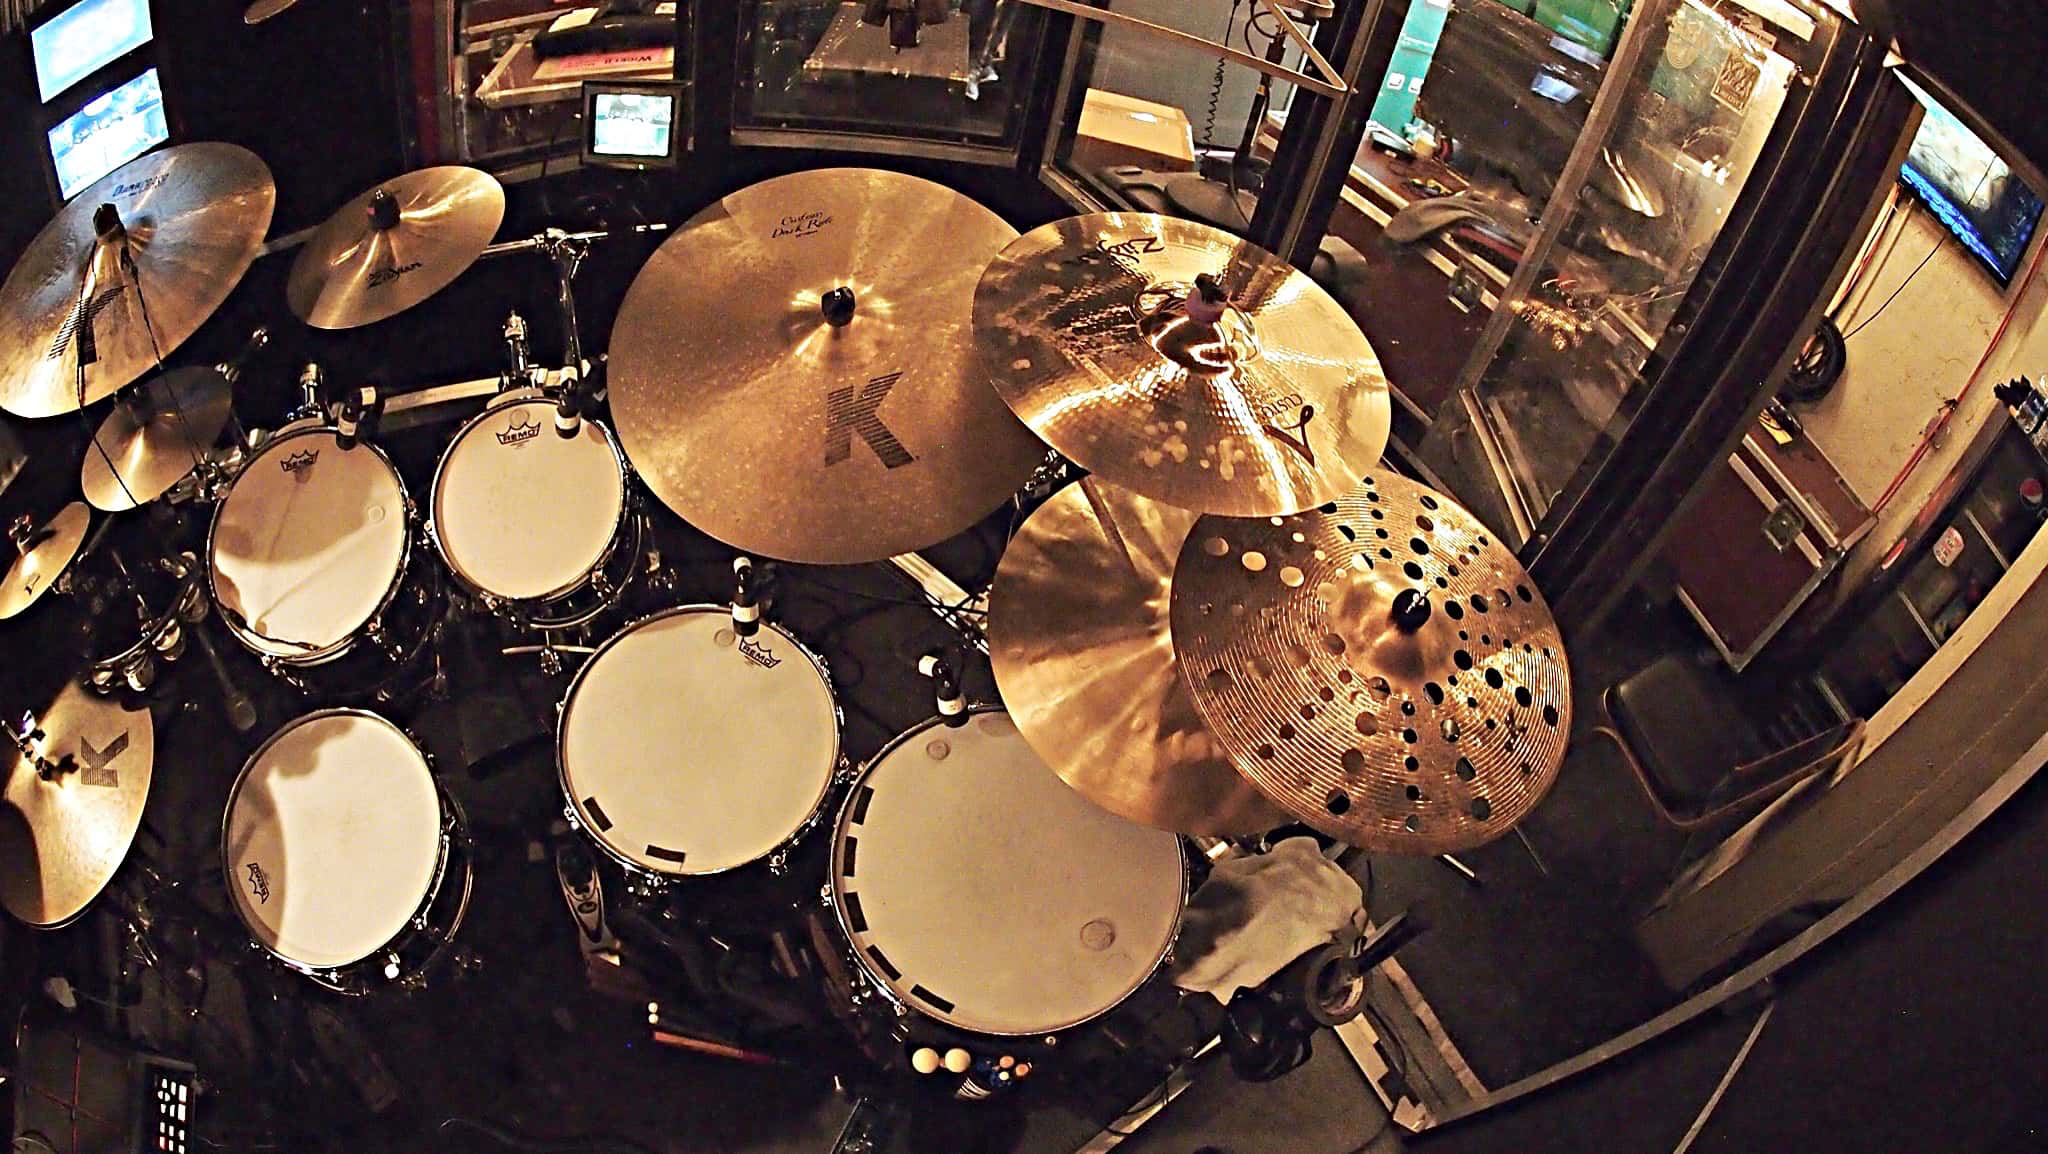 Tim Mulligan's drum set setup for the National Tour of Wicked at the Paramount Theater in Seattle, Washington.